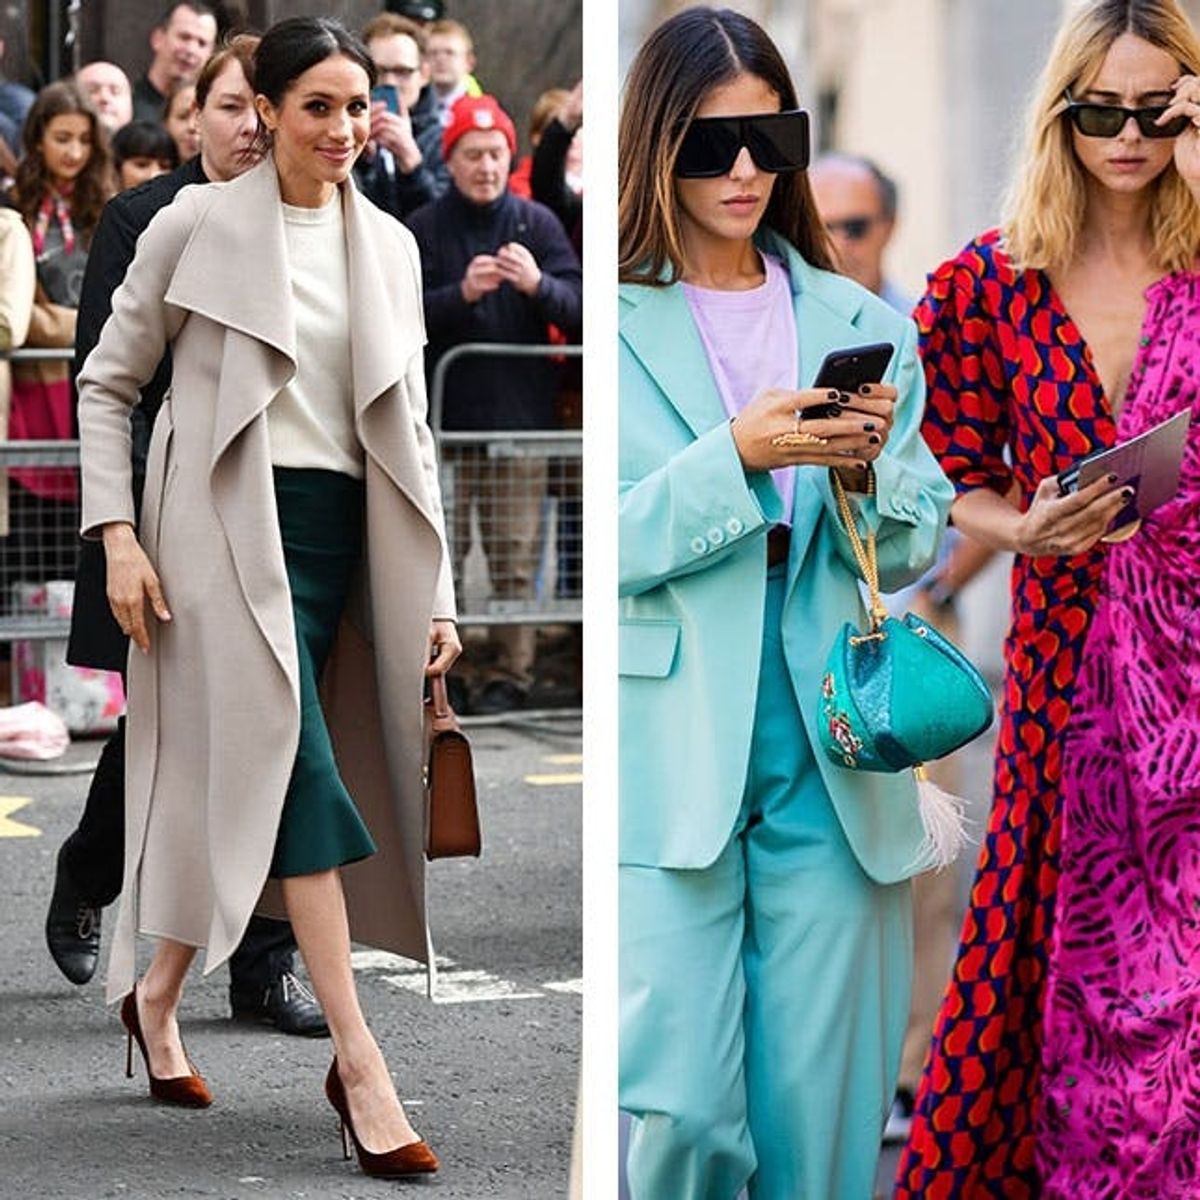 Google’s Top Trending Fashion Searches of 2018 Might Shock You